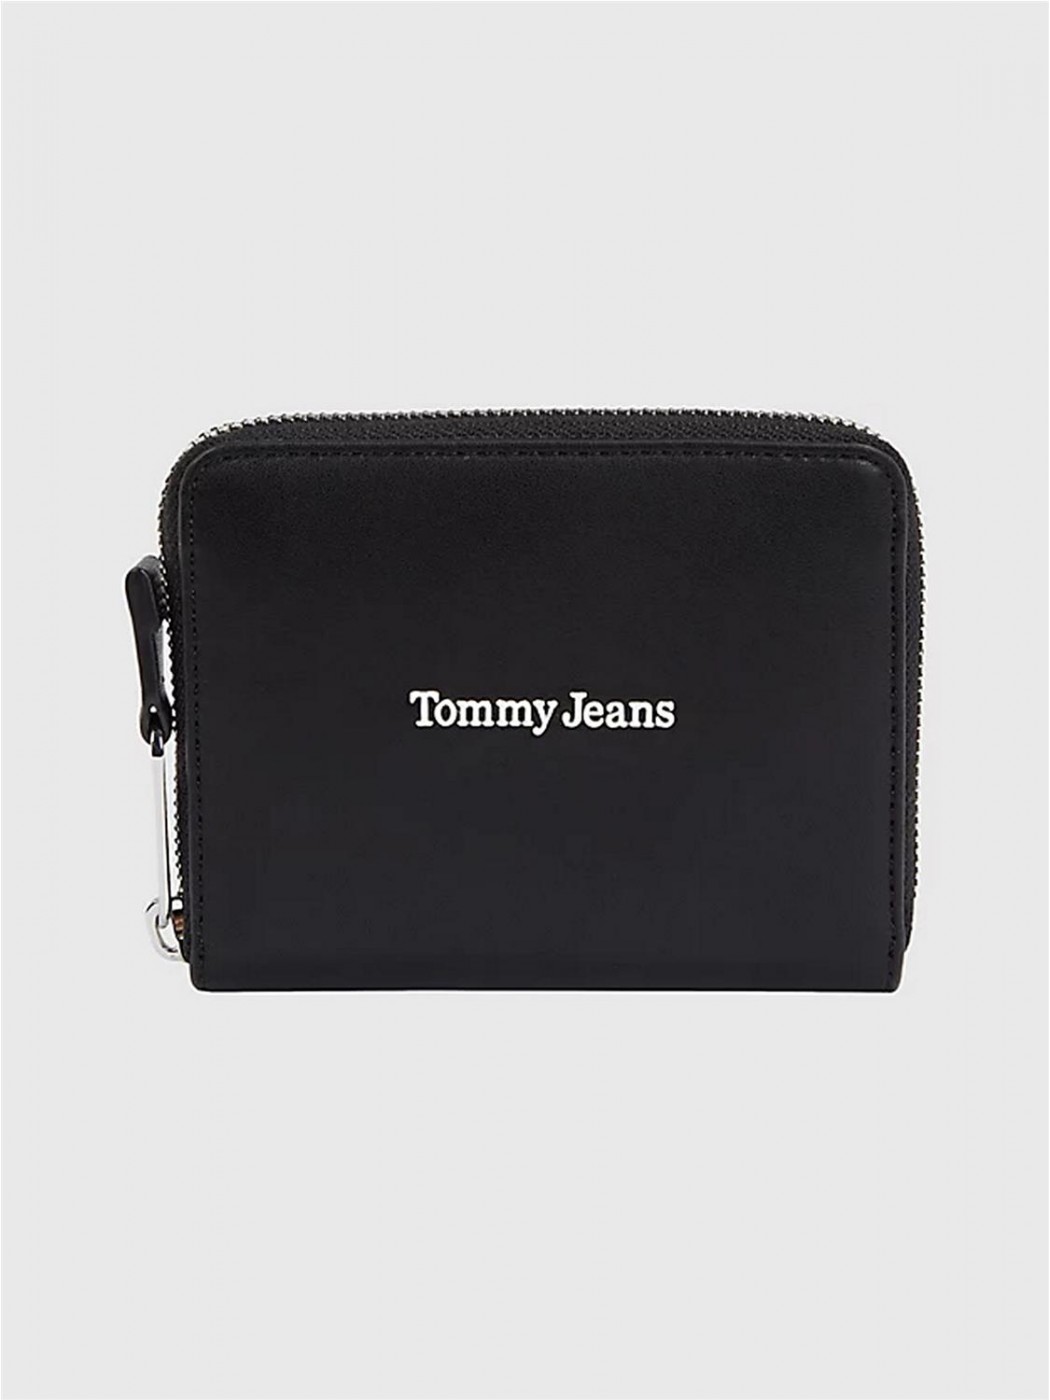 CARTERA TOMMY JEANS MUJER...